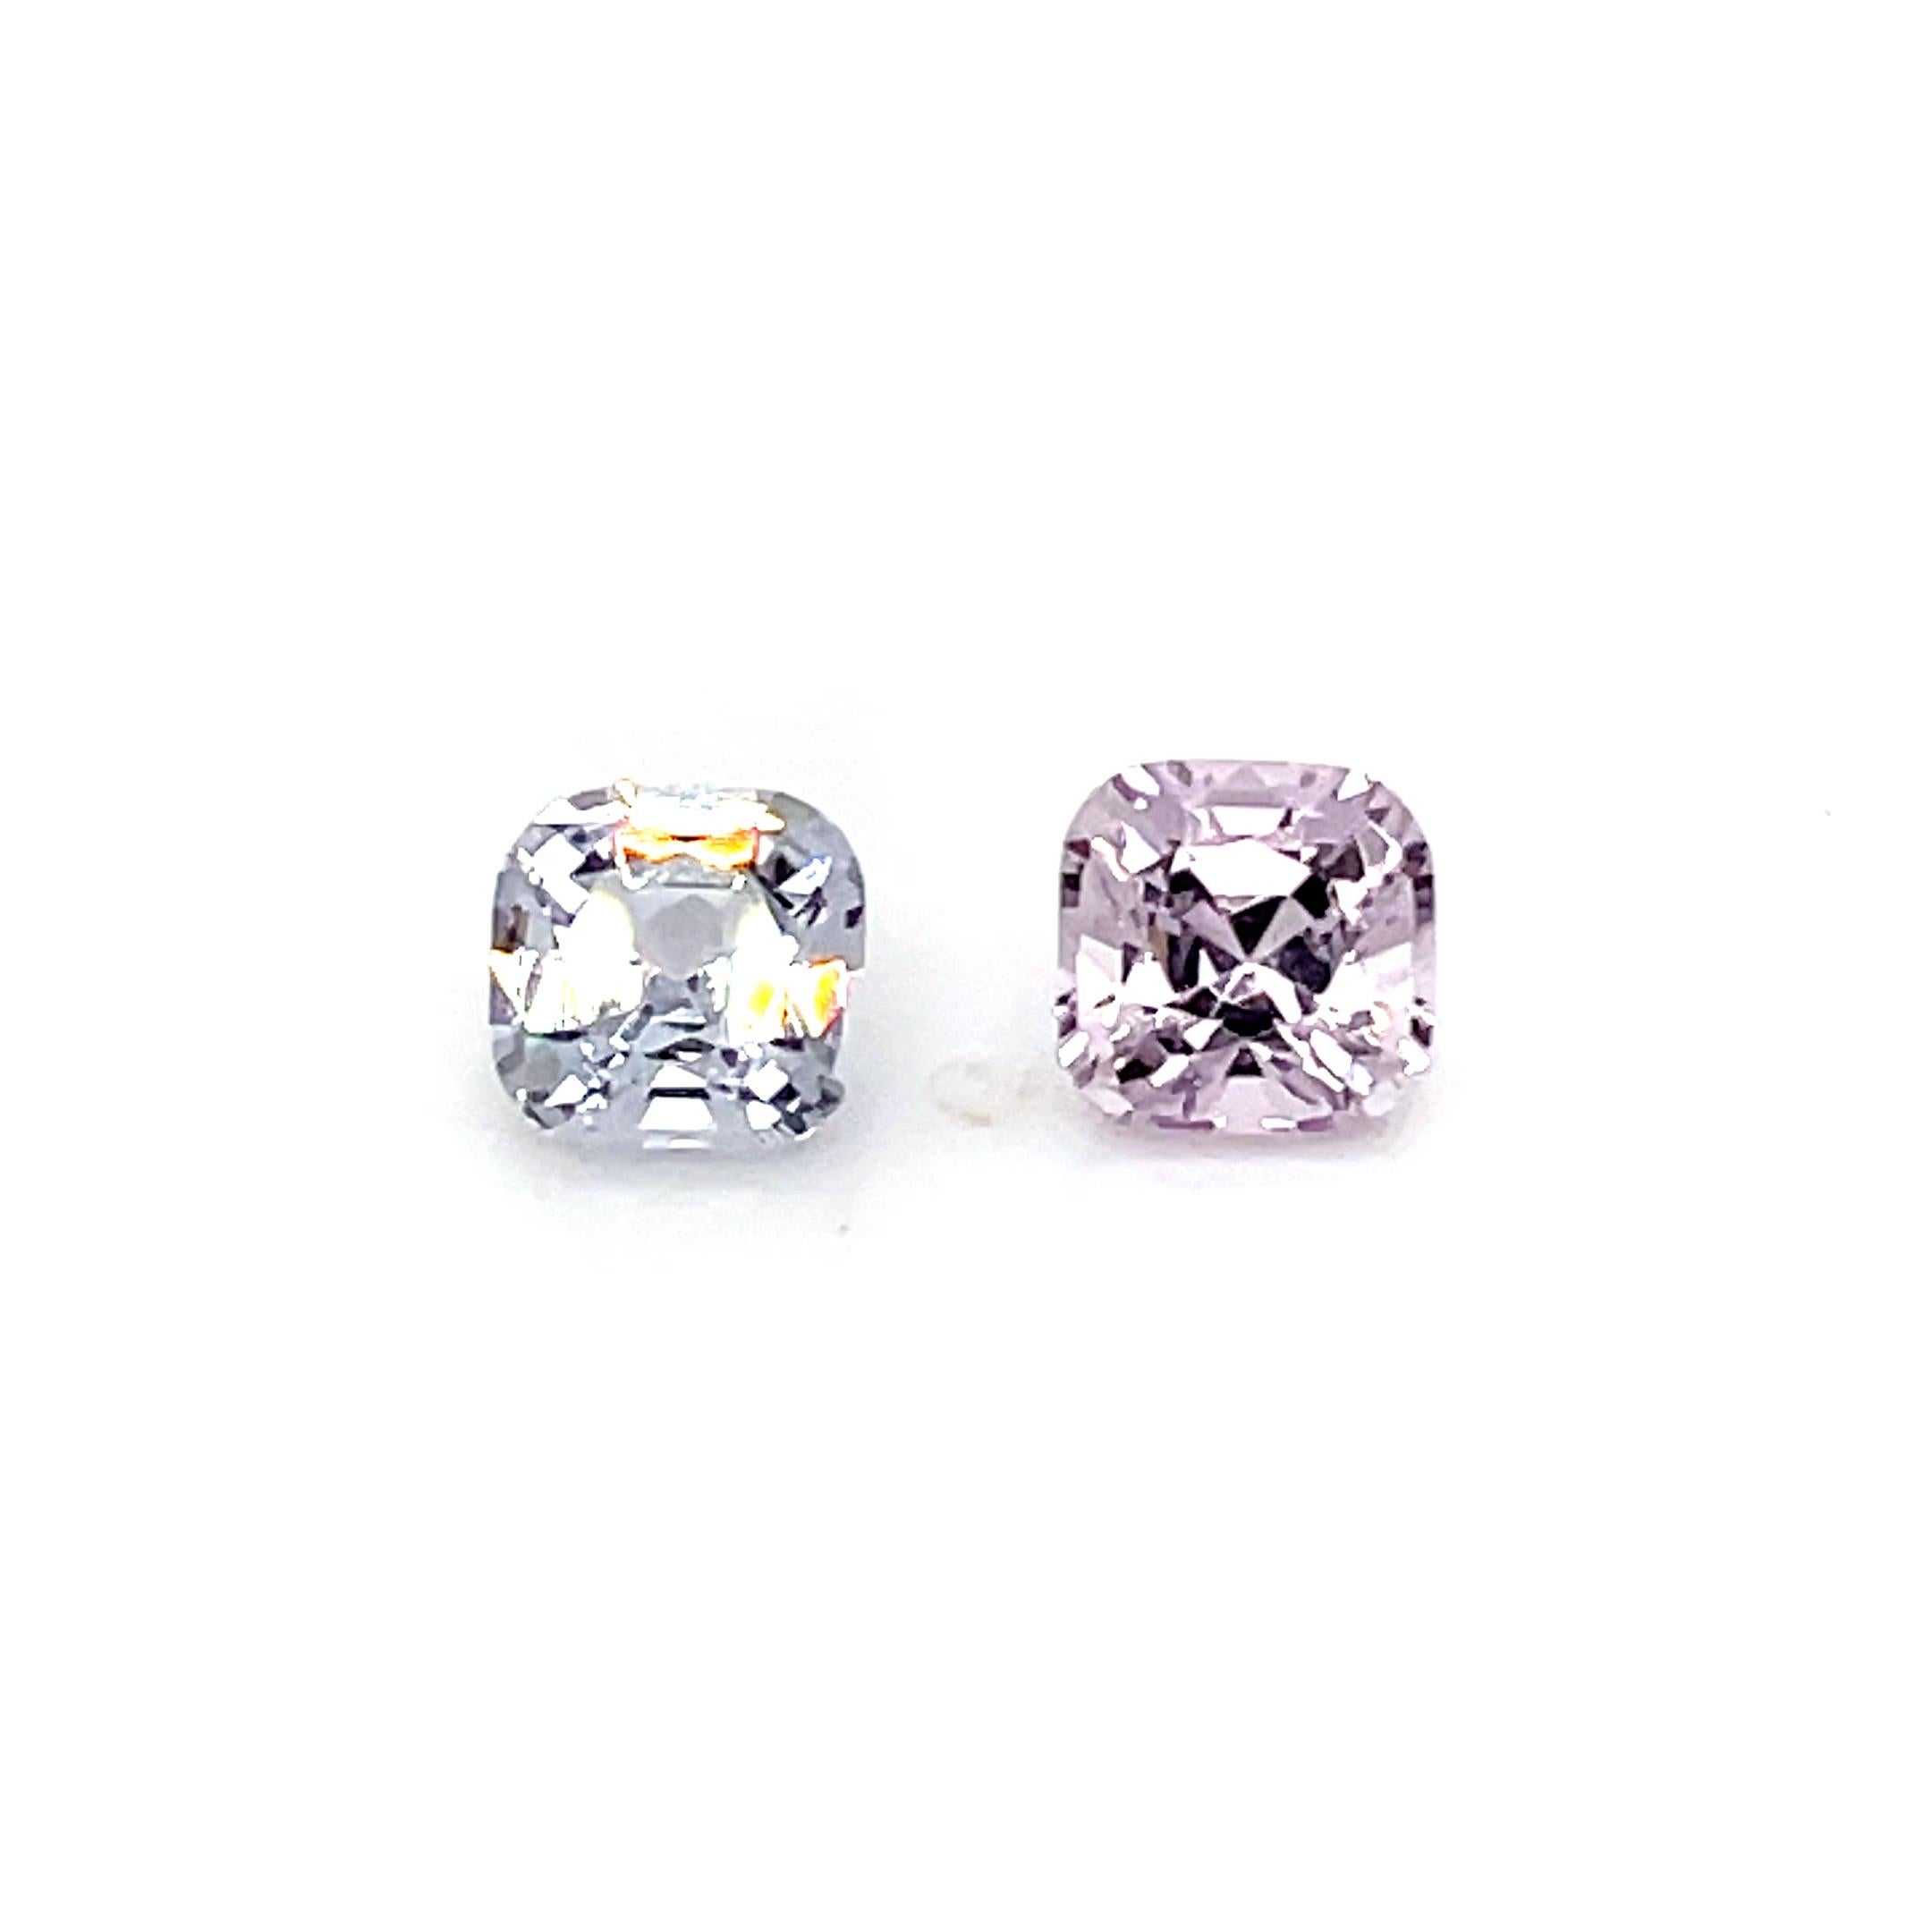 Radiating a delicate yet captivating beauty that makes them stand out with their distinct blend of greyish-pink tones. 

The combined weight of these stunning two grayish pink spinel gems is 2.73 carats.

Their outstanding color and well-cut design,